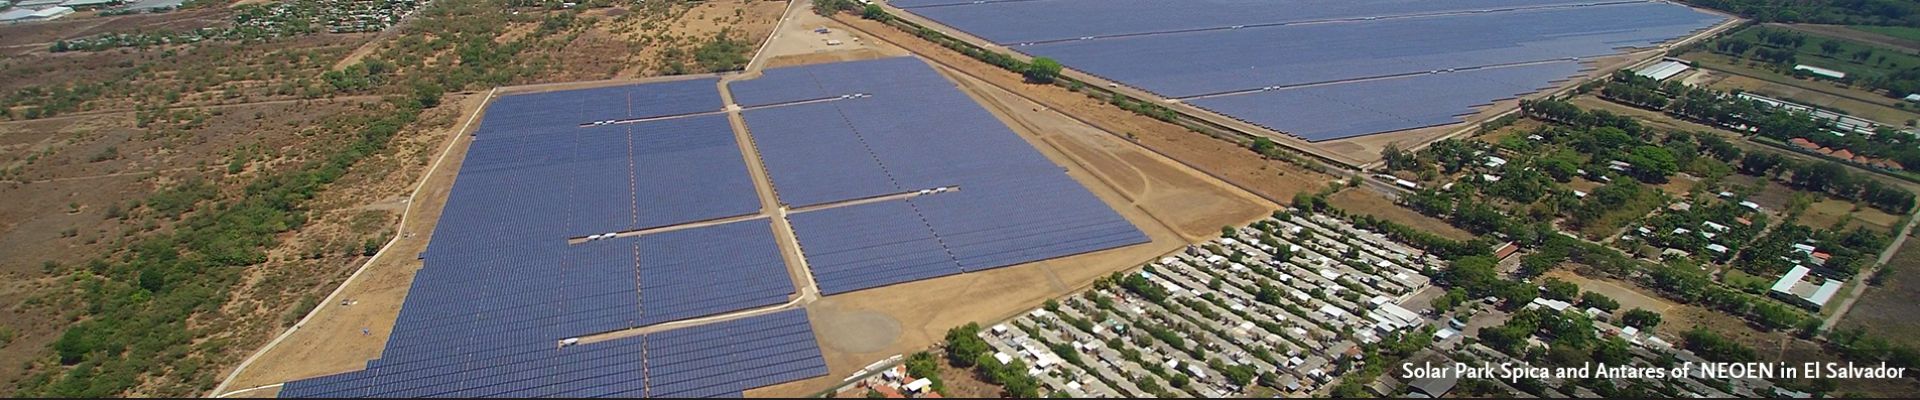 Solar power forecasts for NEOEN's Spica and Antares solar parks in El Salvador